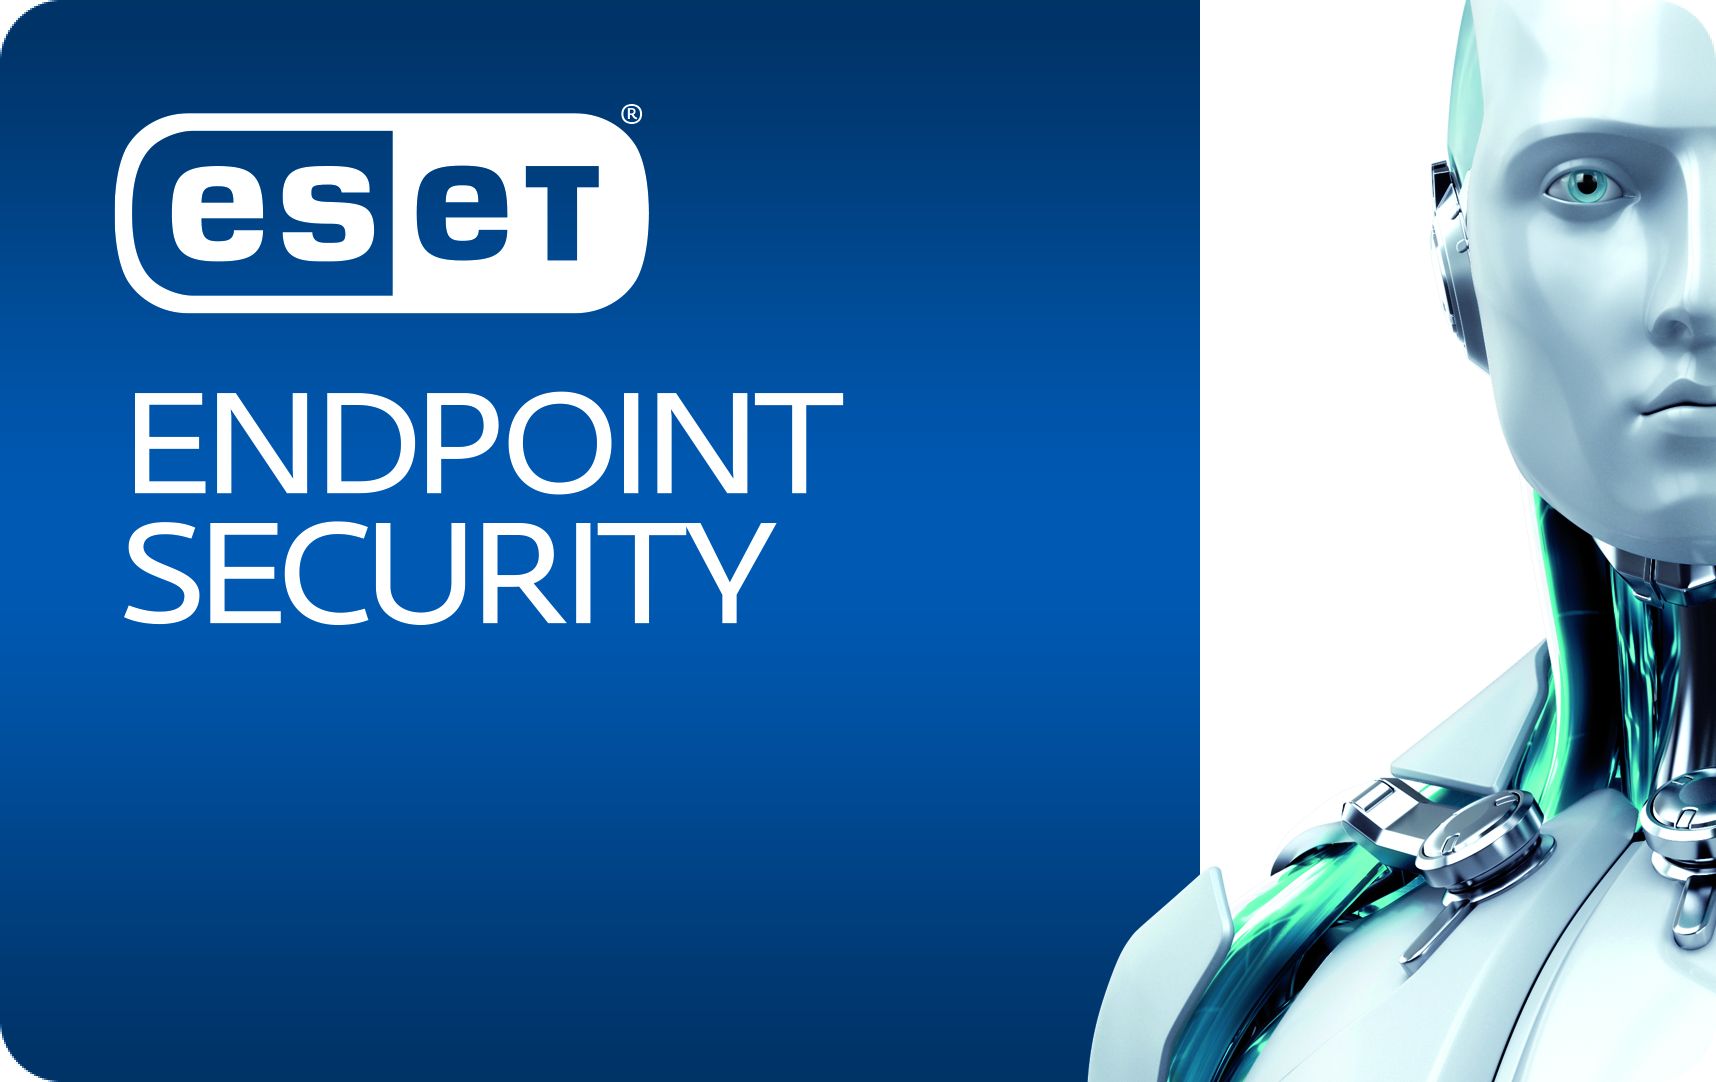 ESET Endpoint Security 11.0.2032.0 free downloads